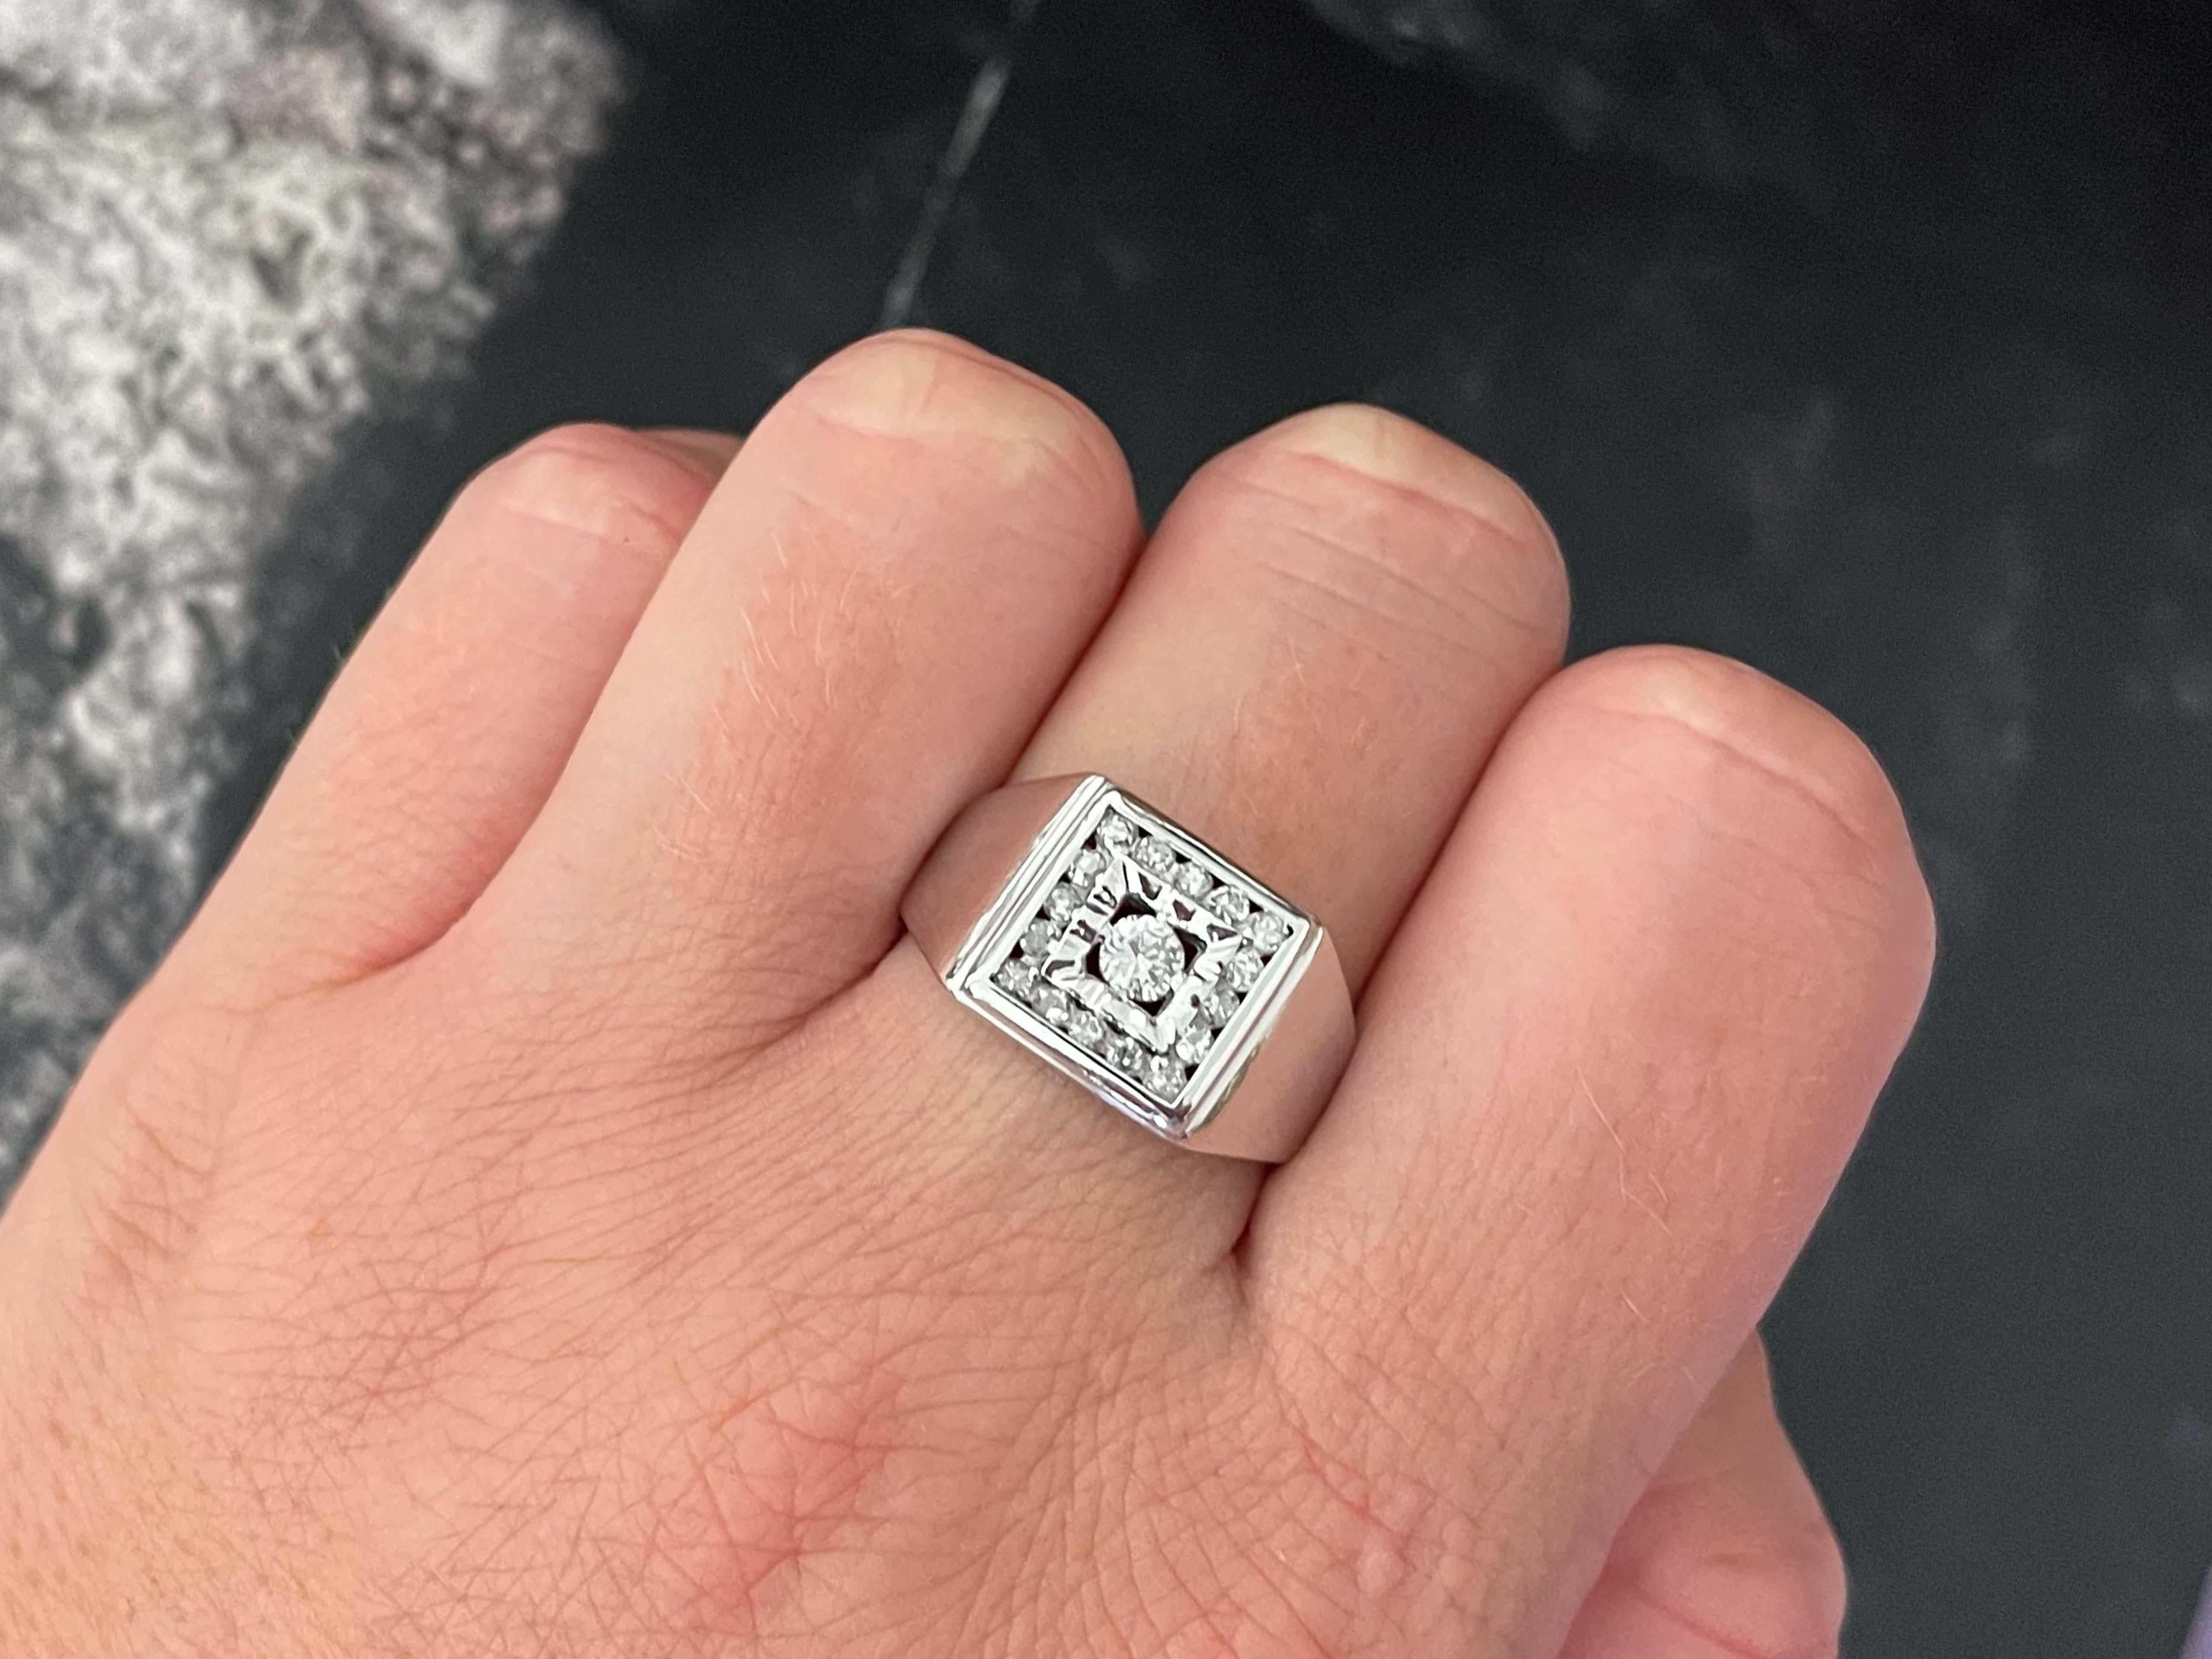 Item Specifications:

Metal: 14k White Gold

Diamond Count: 17 round brilliant diamonds

Diamond Carat Weight: 0.3

Diamond Color: H

Diamond Clarity: SI

Ring Width: 11.56 mm

Ring Size: 8 (resizable)

Total Weight: 6.6 Grams

Stamped: